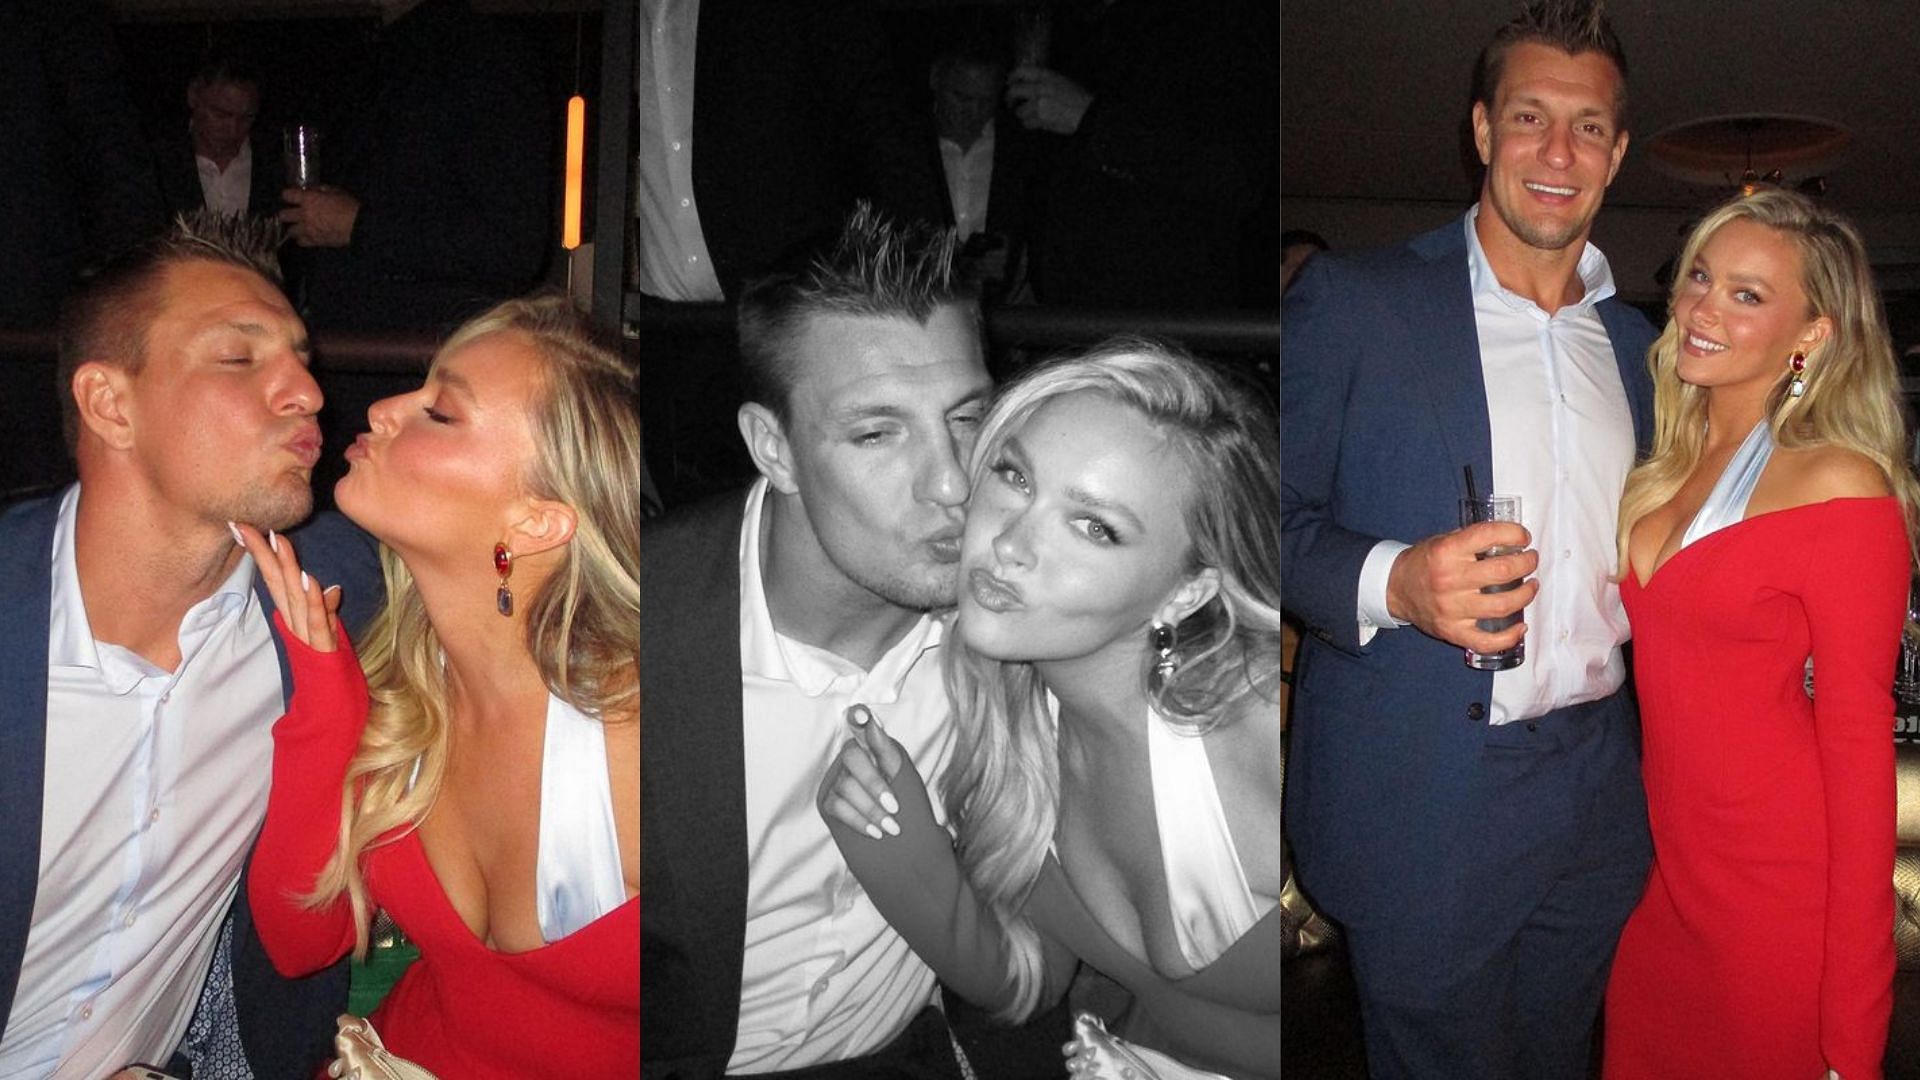 Rob Gronkowski and Camille Kostek at the SI Swimsuit event. (Image credit: @gronk IG)